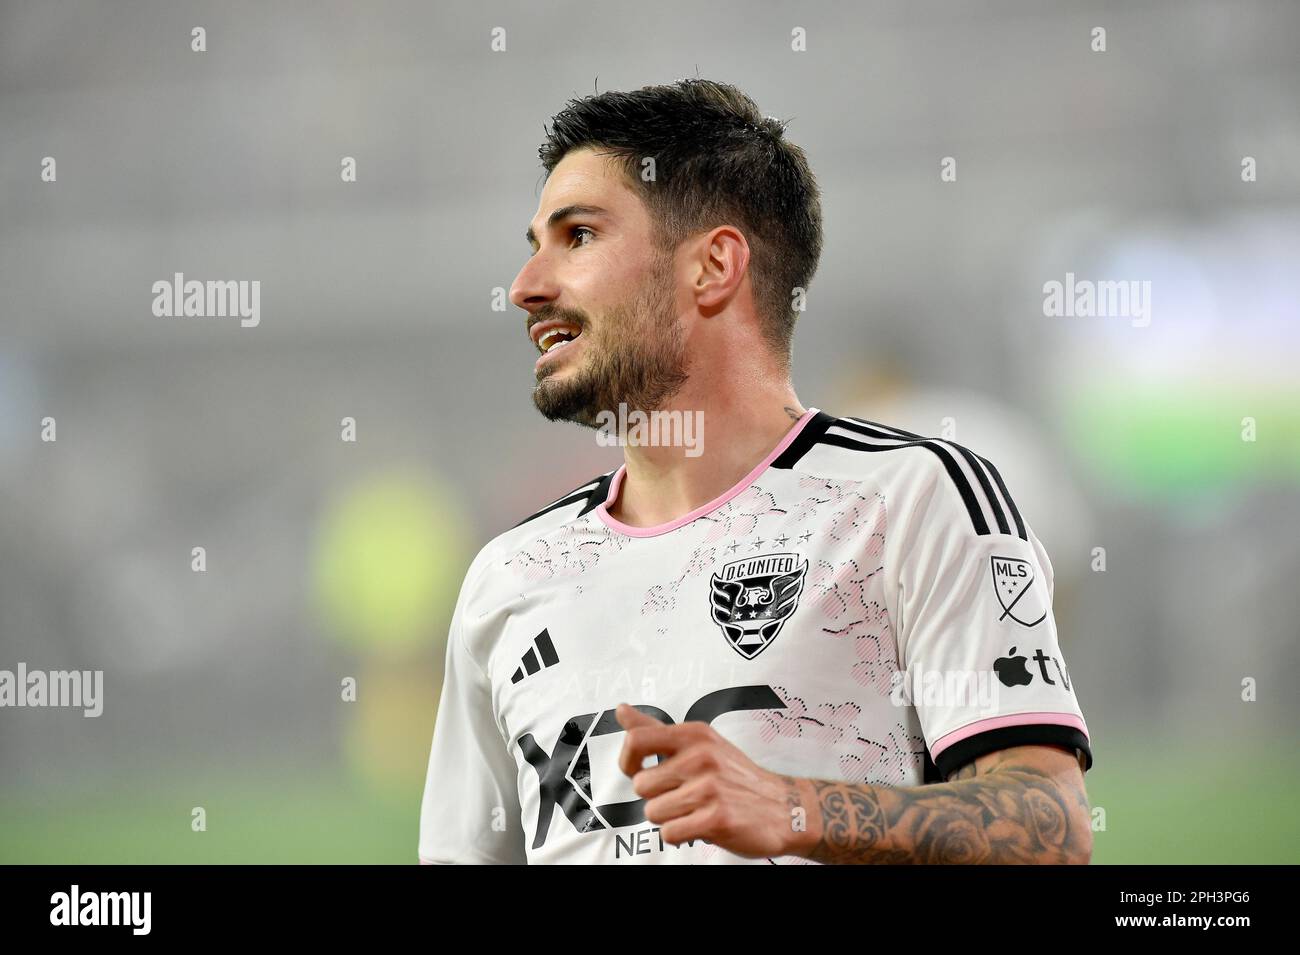 WASHINGTON, DC - MARCH 25: DC United midfielder Taxiarchis Taxi Fountas  (11) reacts while wearing the D.C. United Cherry Blossom Kit Jersey during  the New England Revolution versus D.C. United Major League